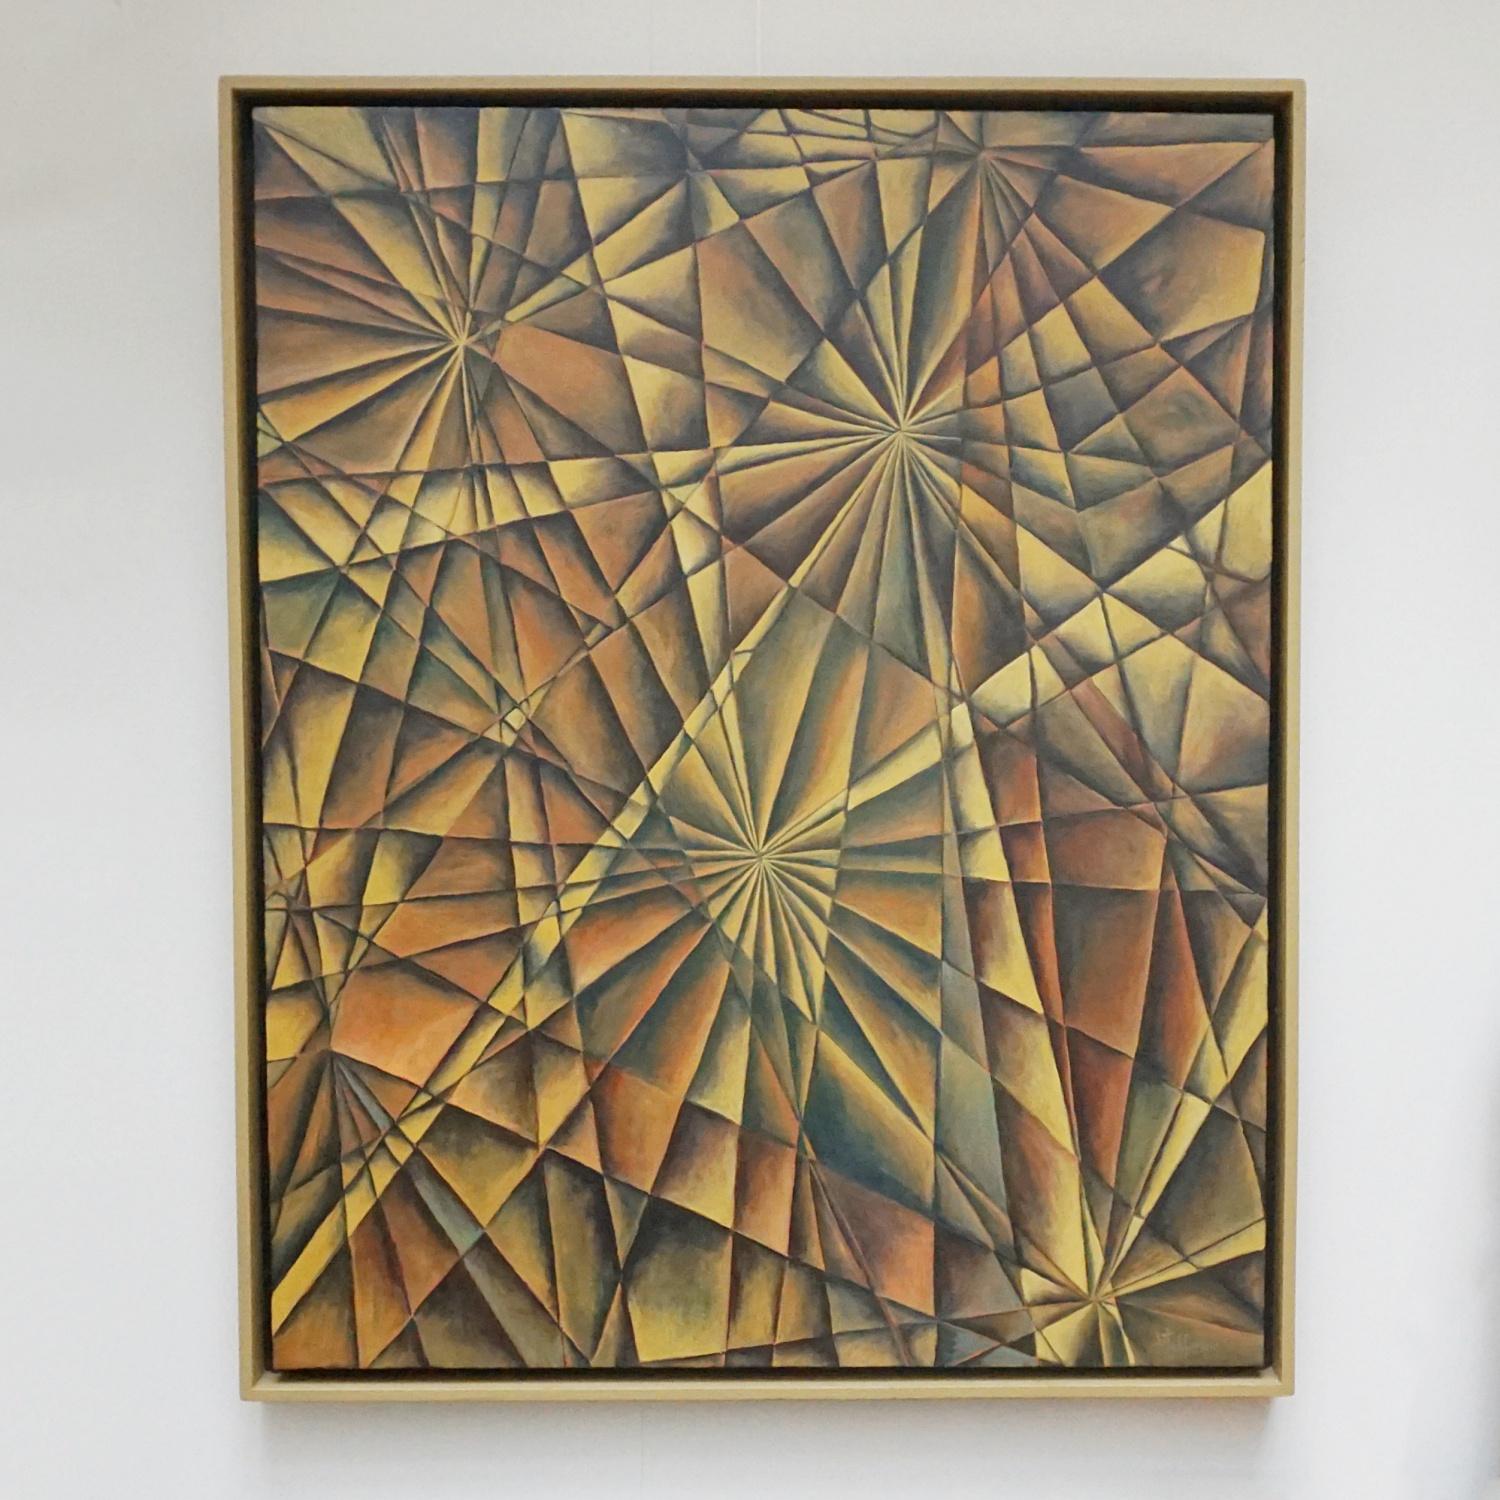 An Art Deco Style Contemporary painting by Vera Jefferson depicting an abstract geometric pattern. Signed V Jefferson to lower right. 

Dimensions: H 79.5cm W 64cm D 6cm

Origin: English

Date: Contemporary 

Vera Jefferson trained at